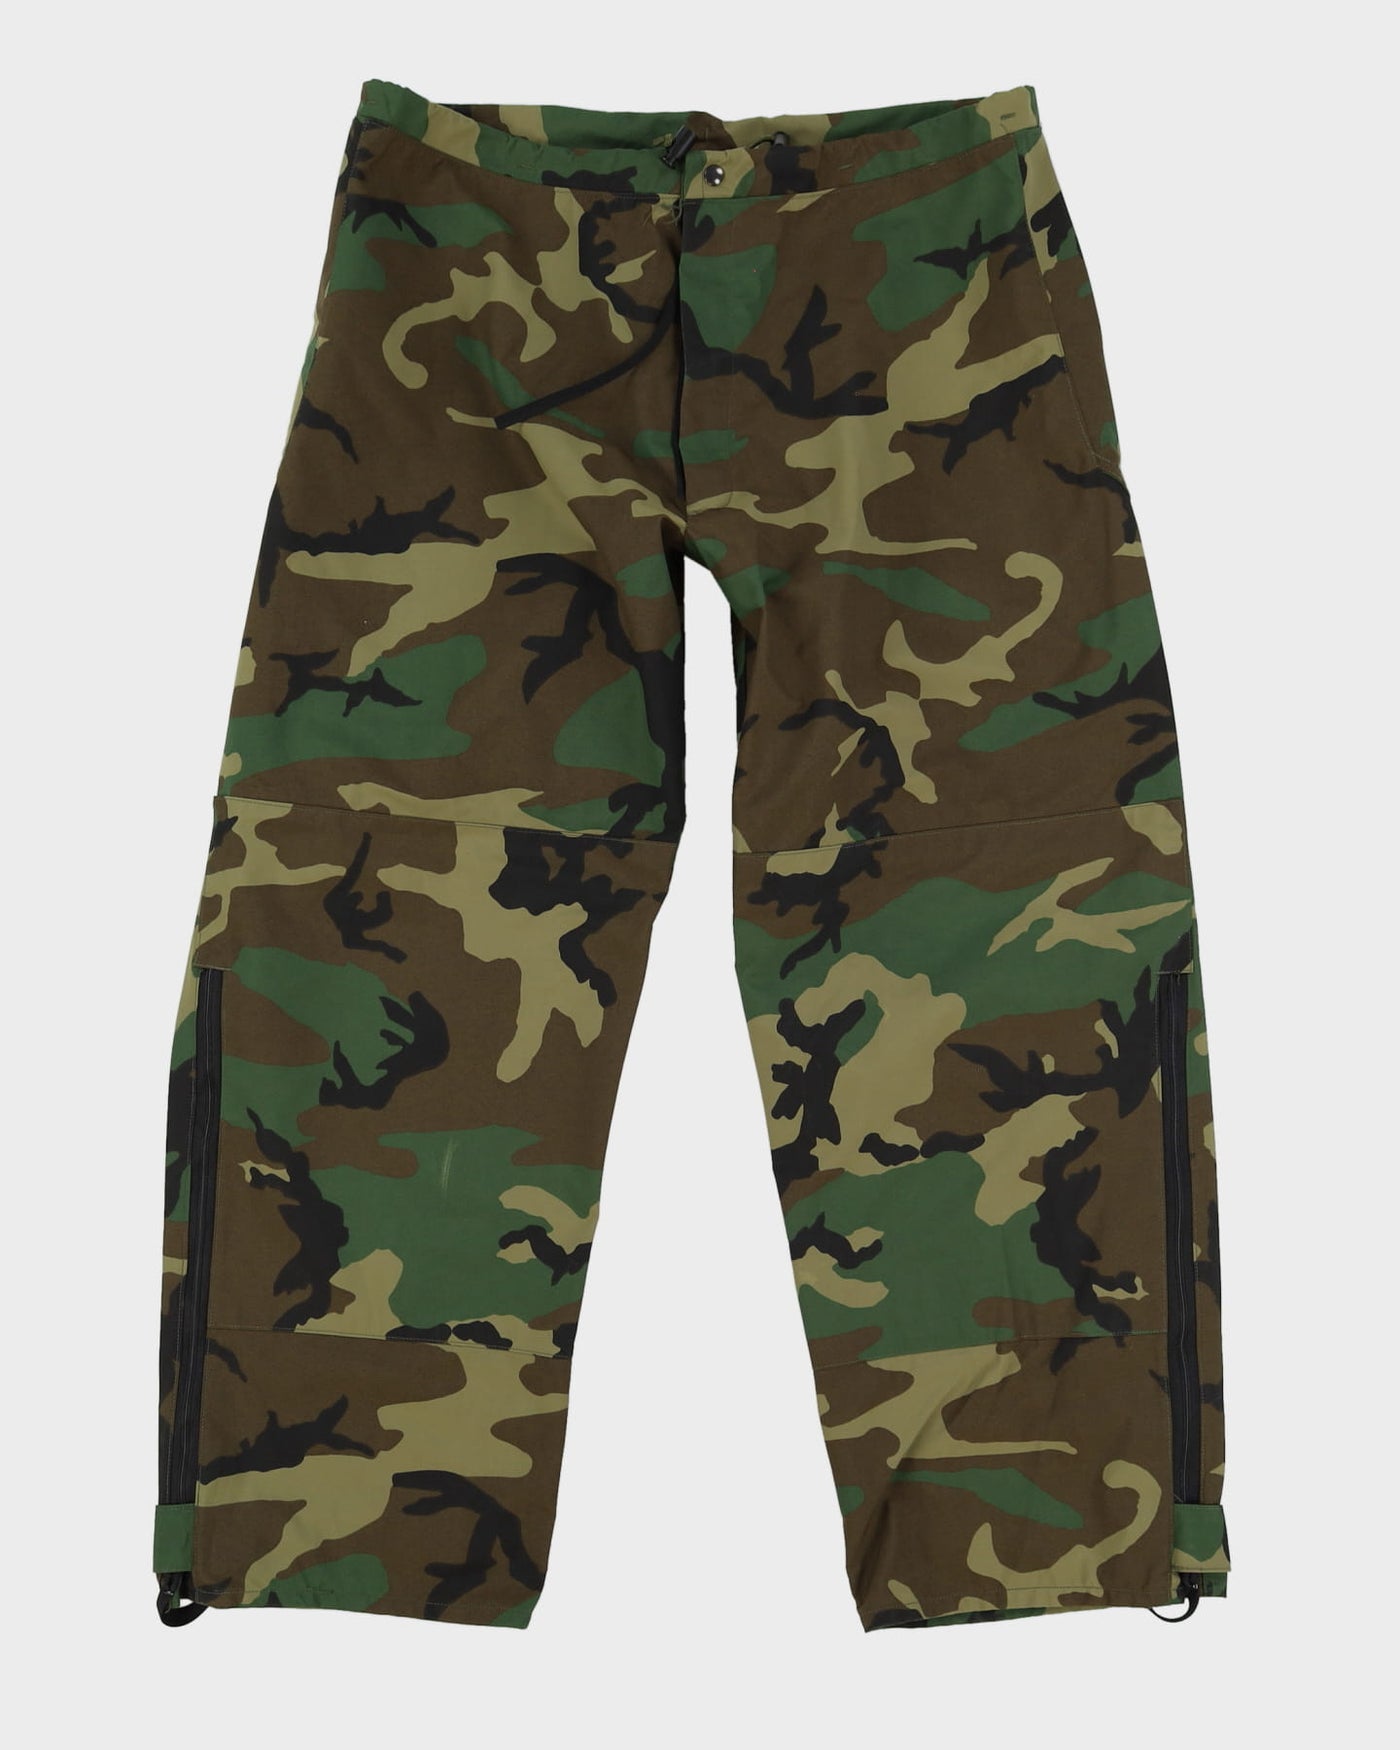 90s Vintage US Army Woodland Camo Waterproof Trousers - 40x30